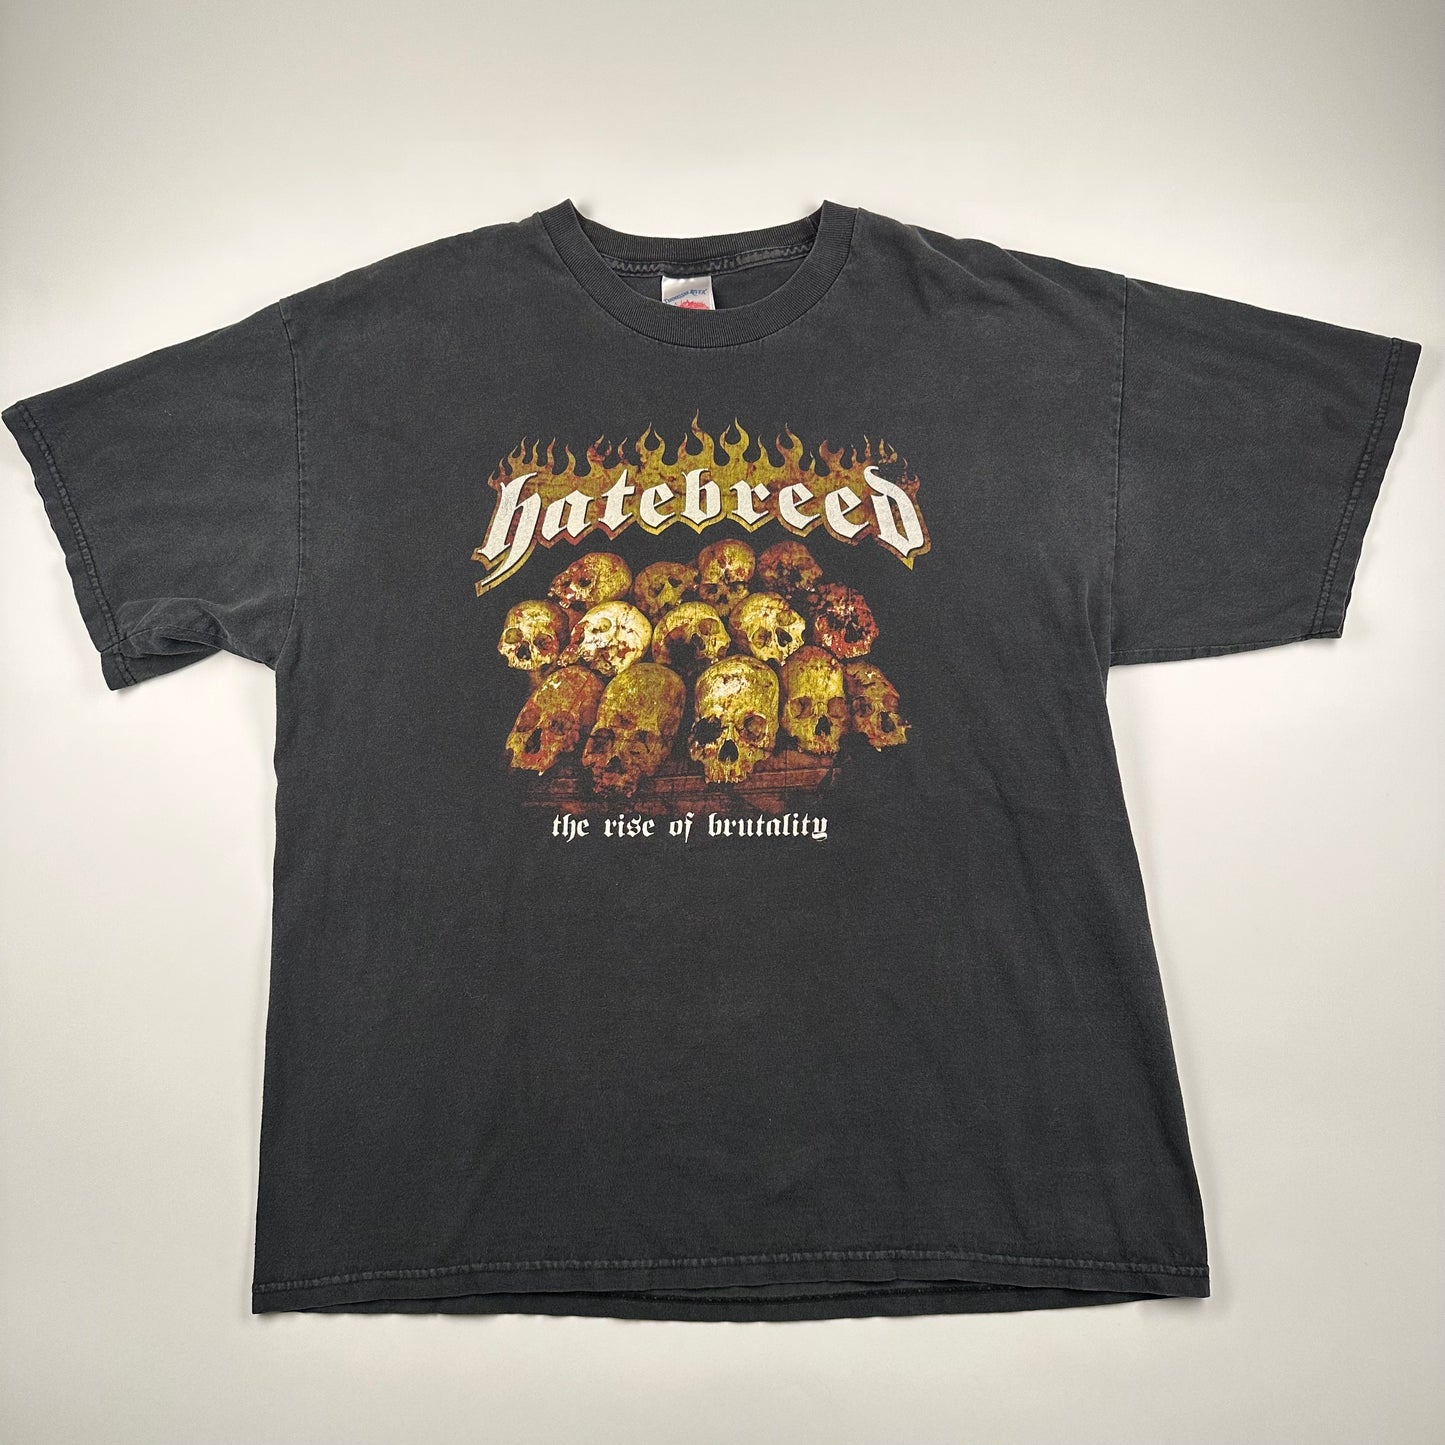 Vintage 2003 Hatebreed shirt XL The Rise Of Brutality